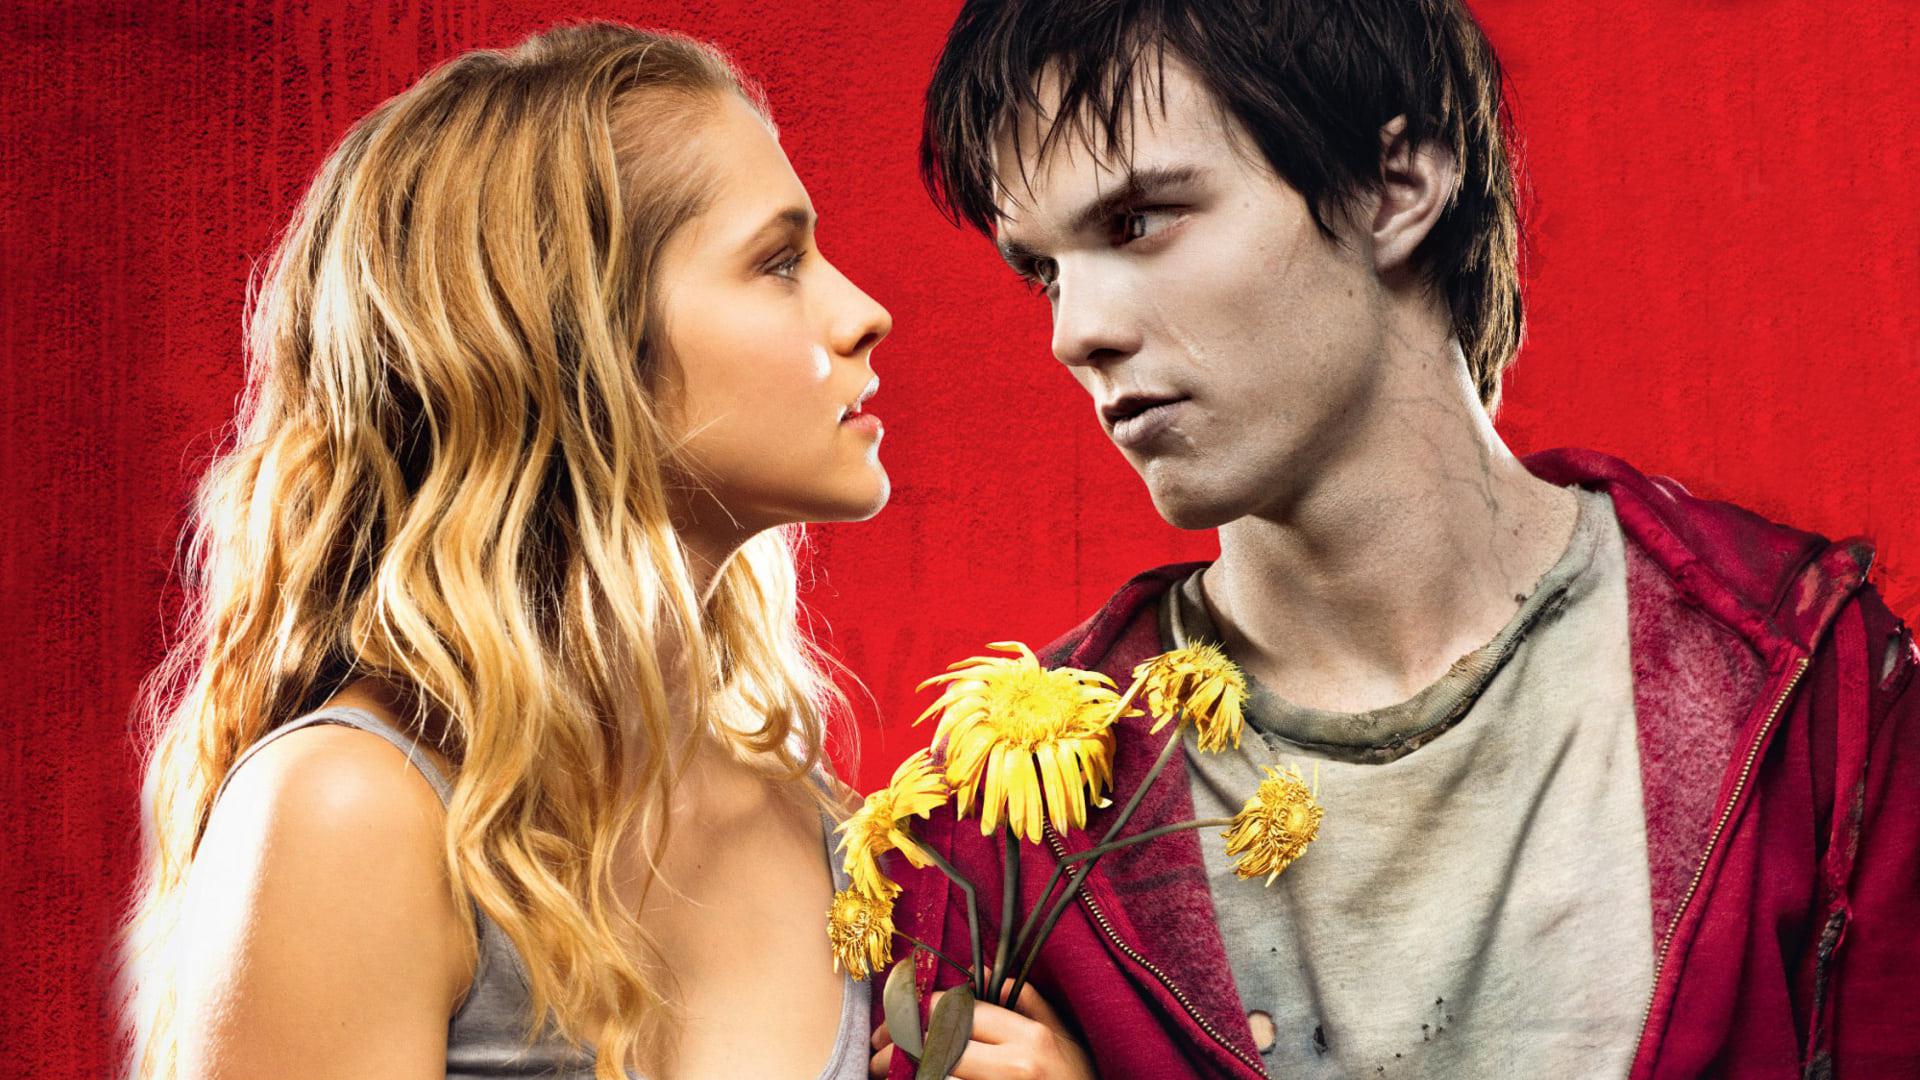 Backdrop Image for Warm Bodies